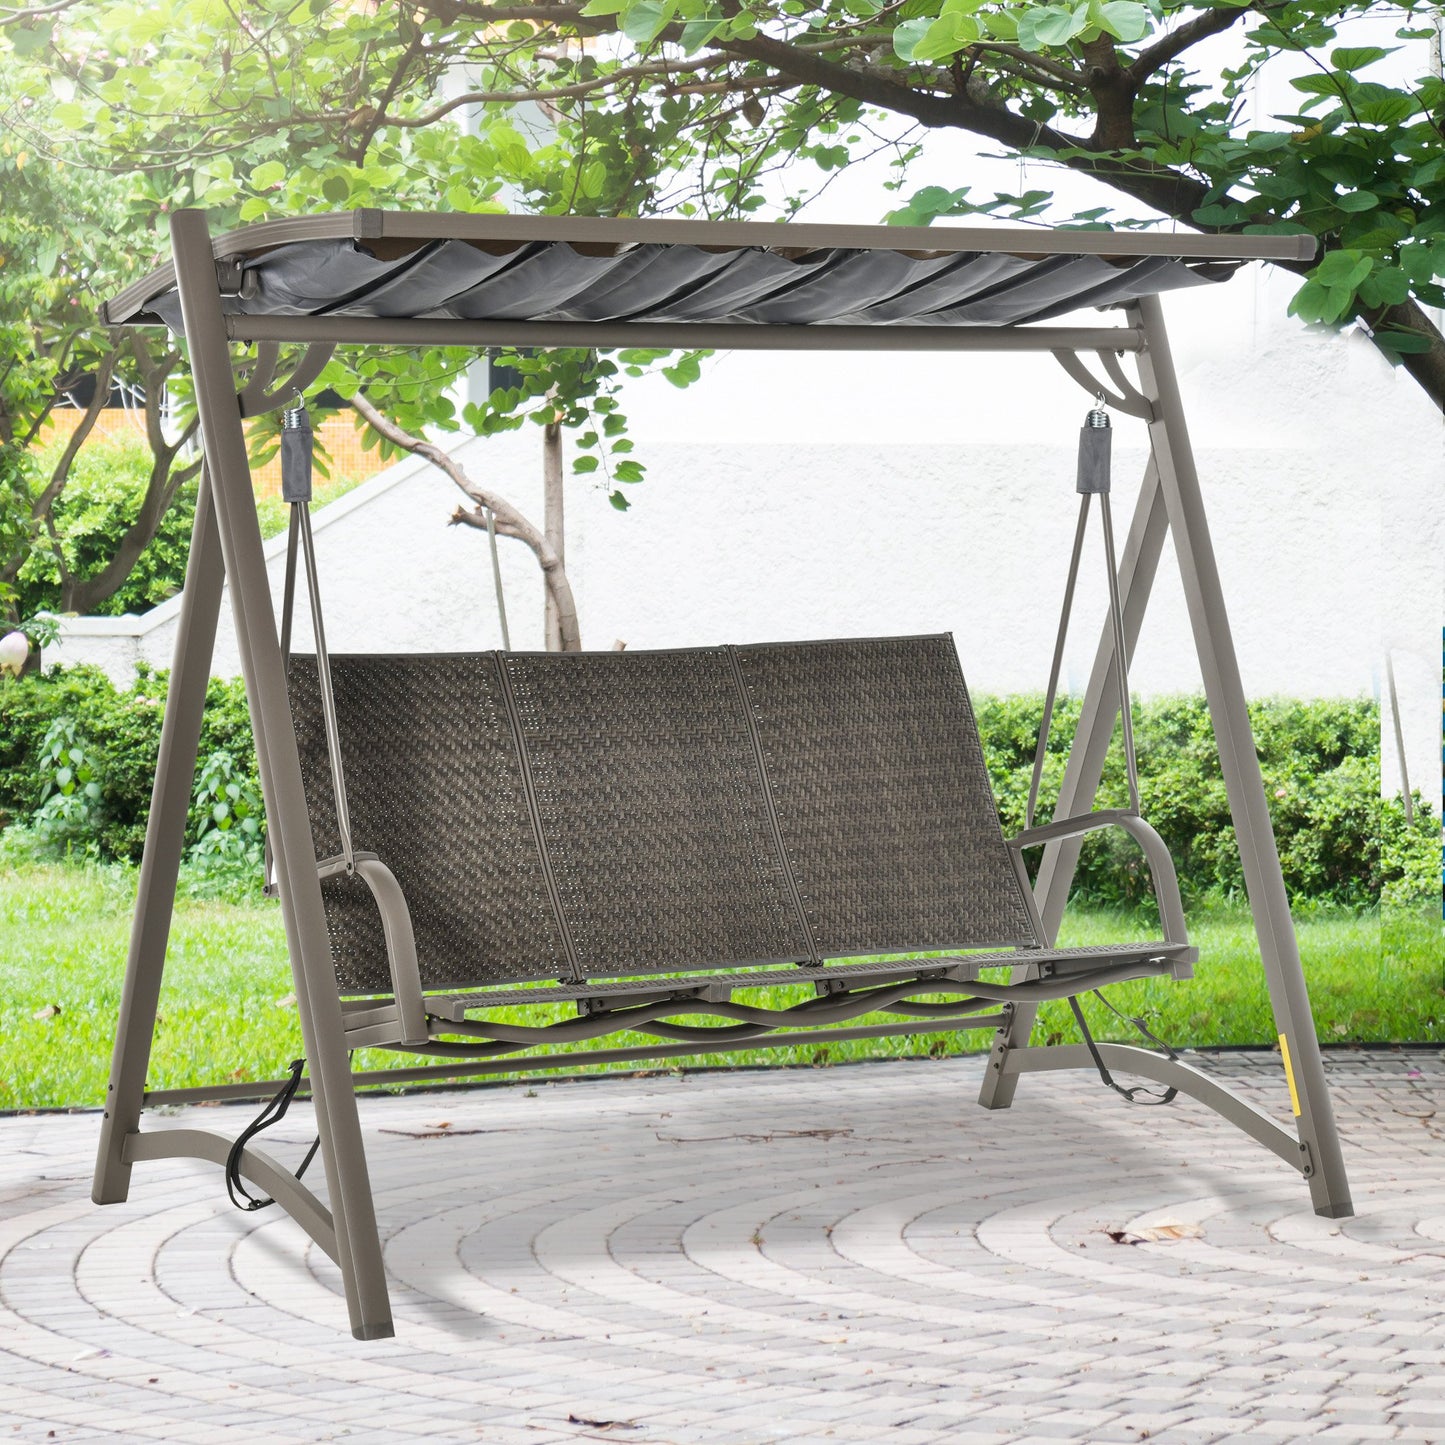 Outsunny 3 Seater Rattan Swing Chair Garden Swing Bench Outdoor w/ Adjustable Canopy